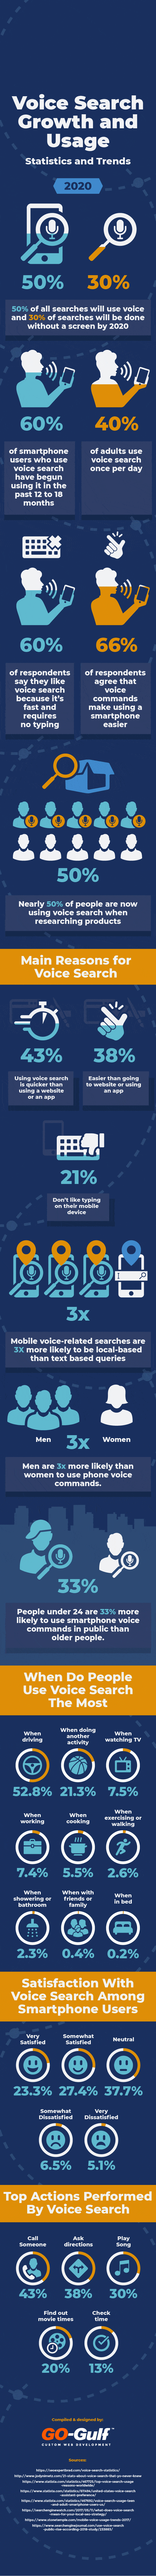 Voice Search Usage on the Rise and How it Will Shape the Future of Marketing